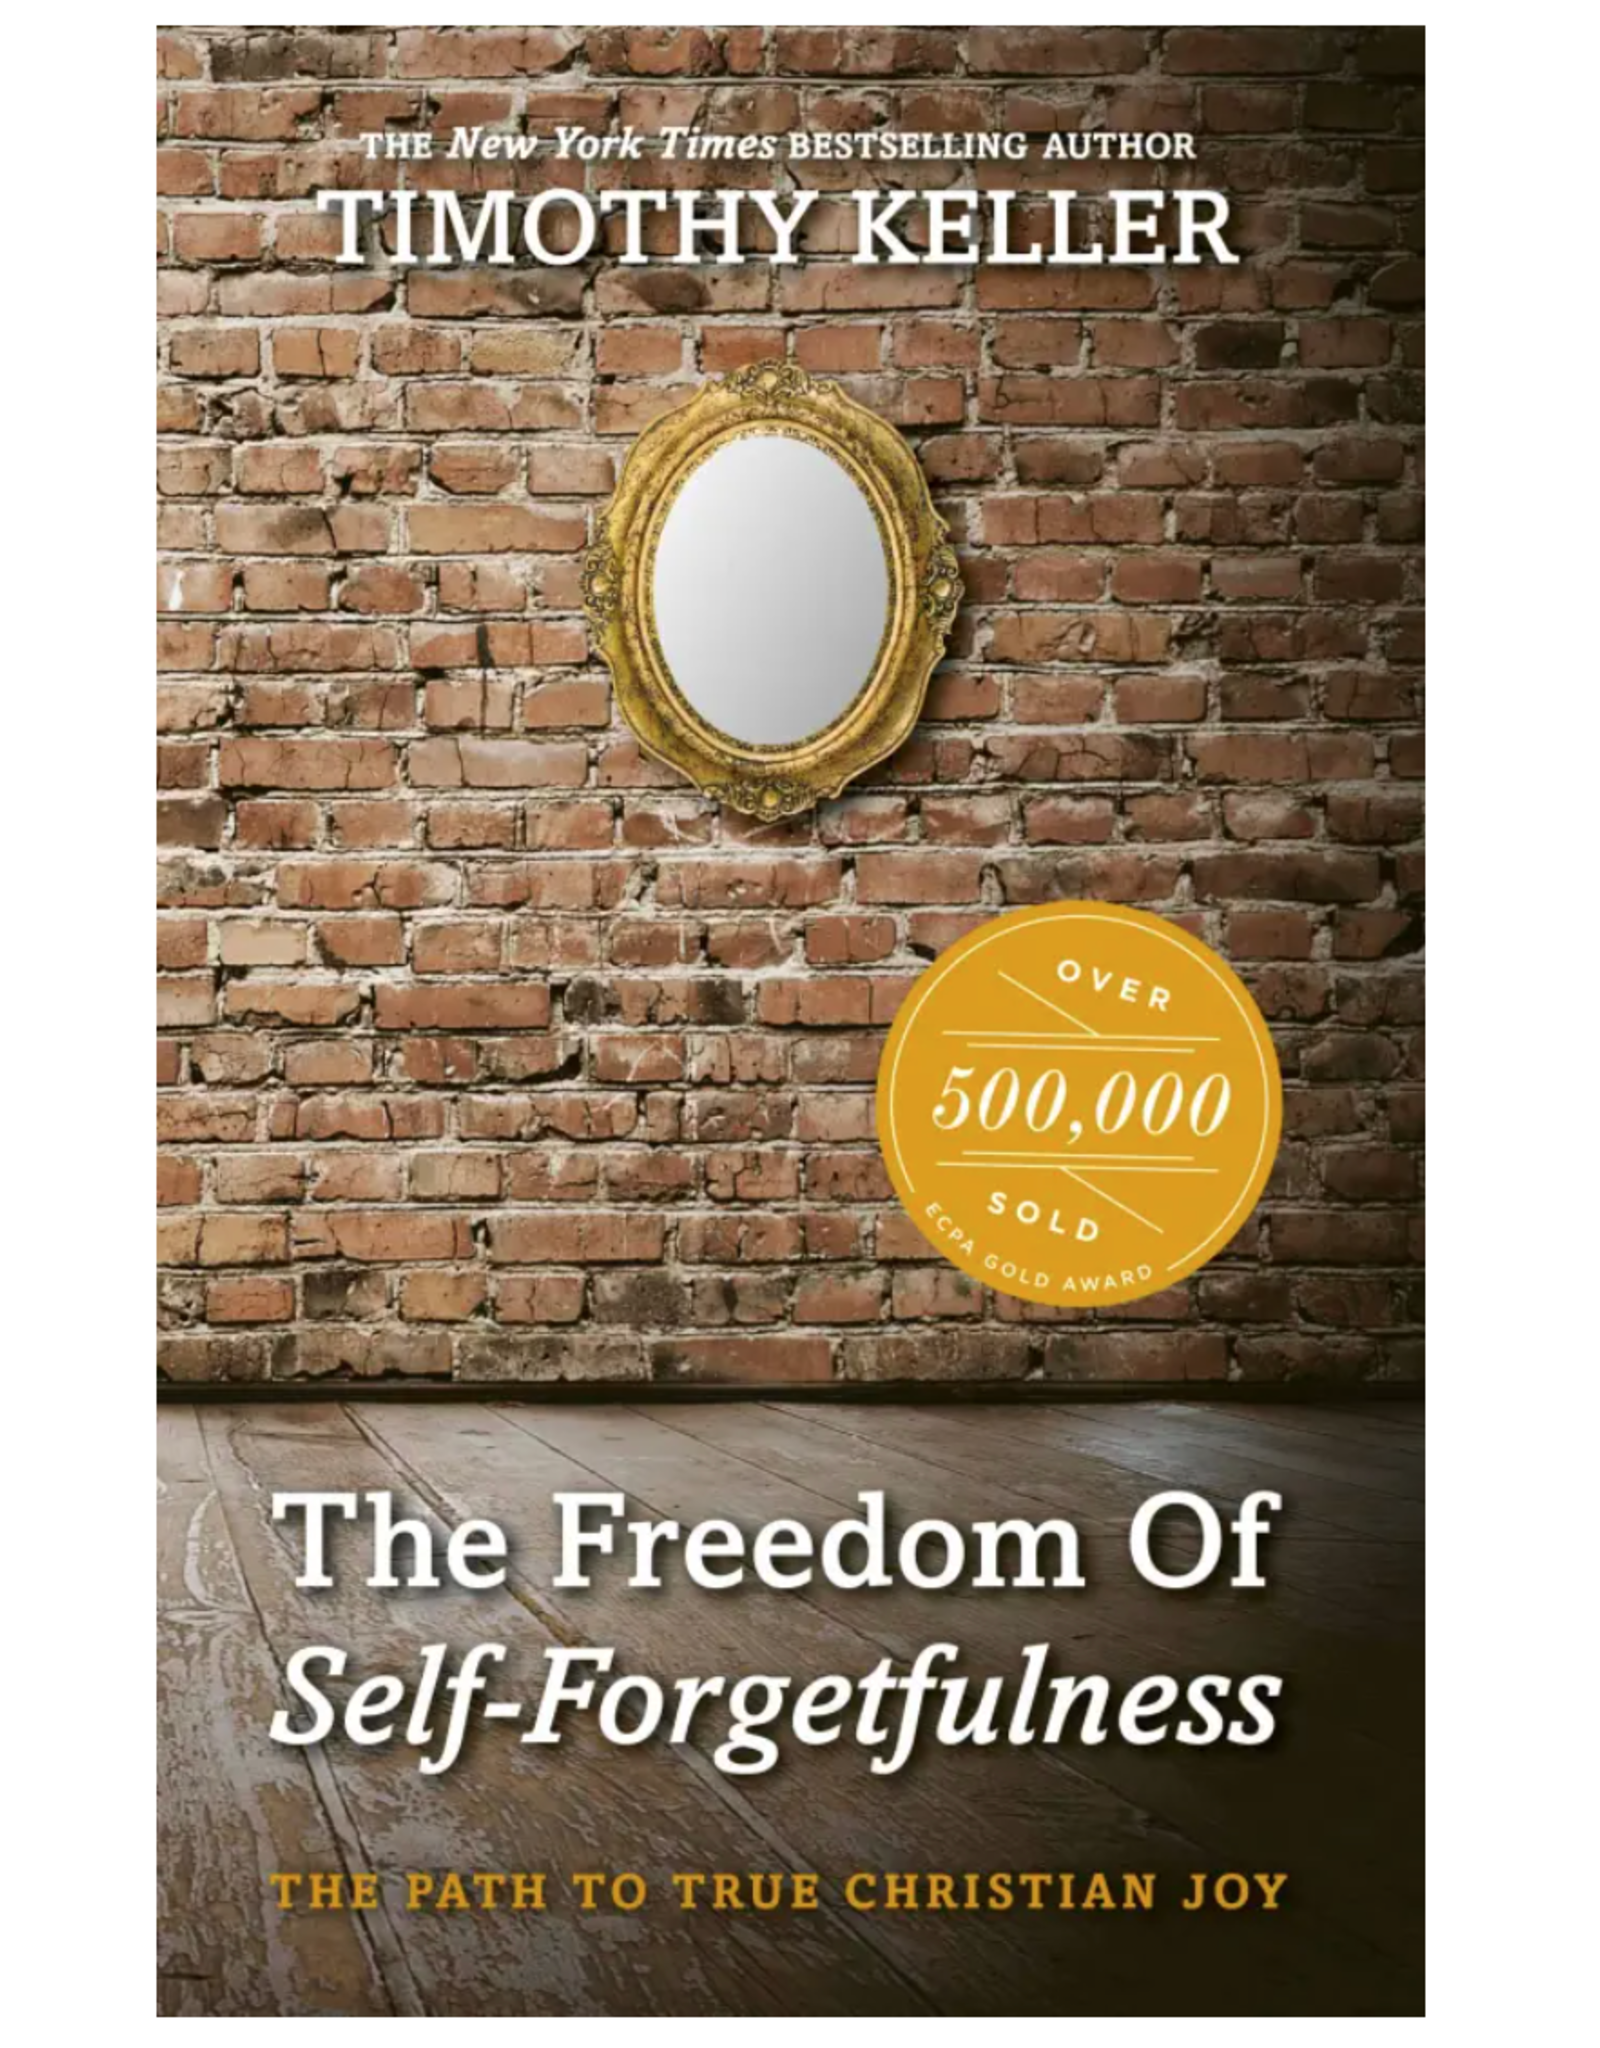 Timothy J Keller The Freedom of Self-Forgetfulness - Booklet